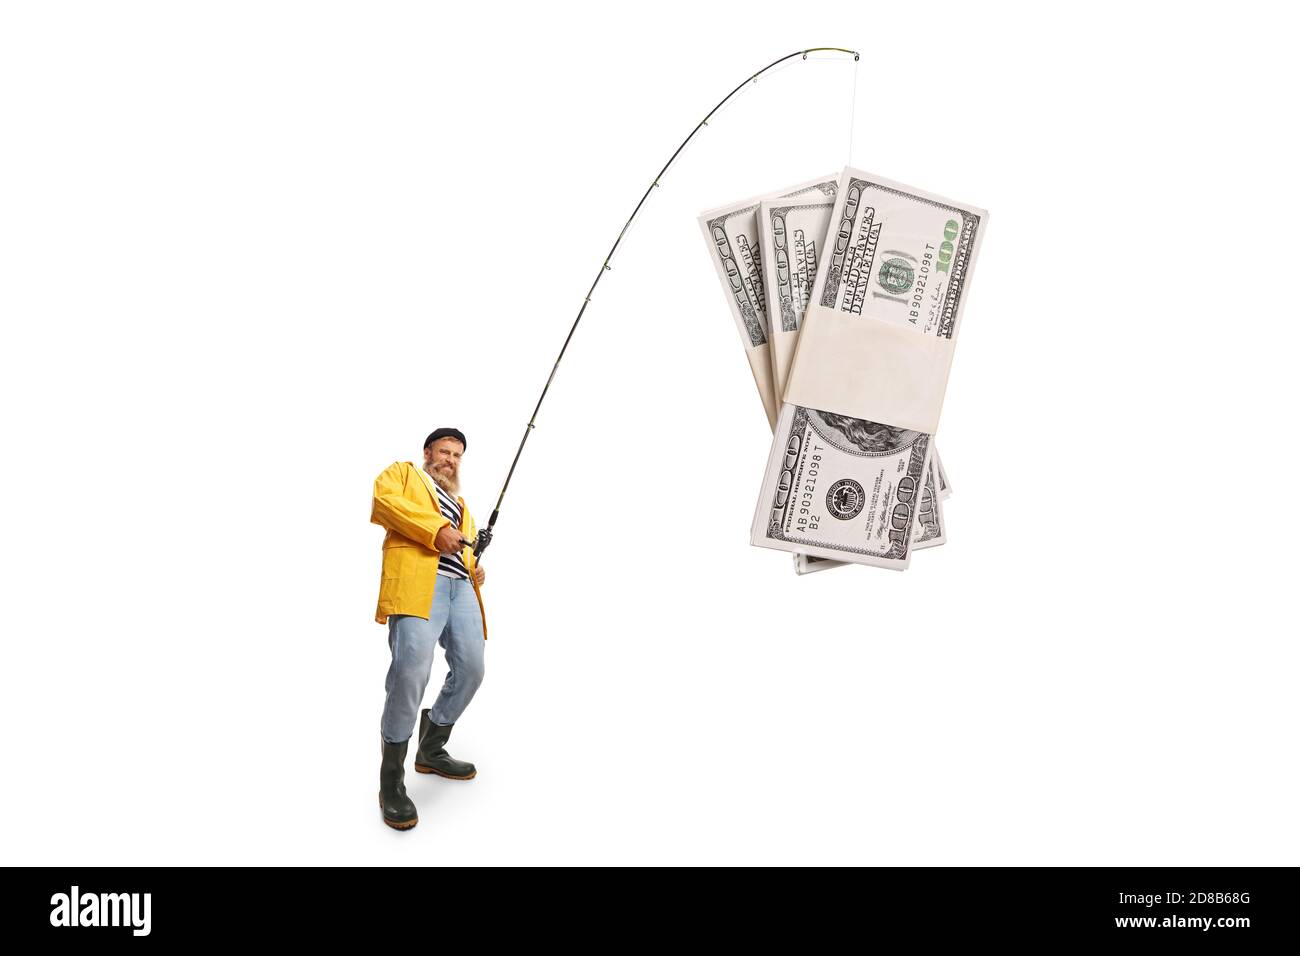 https://c8.alamy.com/comp/2D8B68G/fisherman-catching-money-with-a-fishing-pole-isolated-on-white-background-2D8B68G.jpg